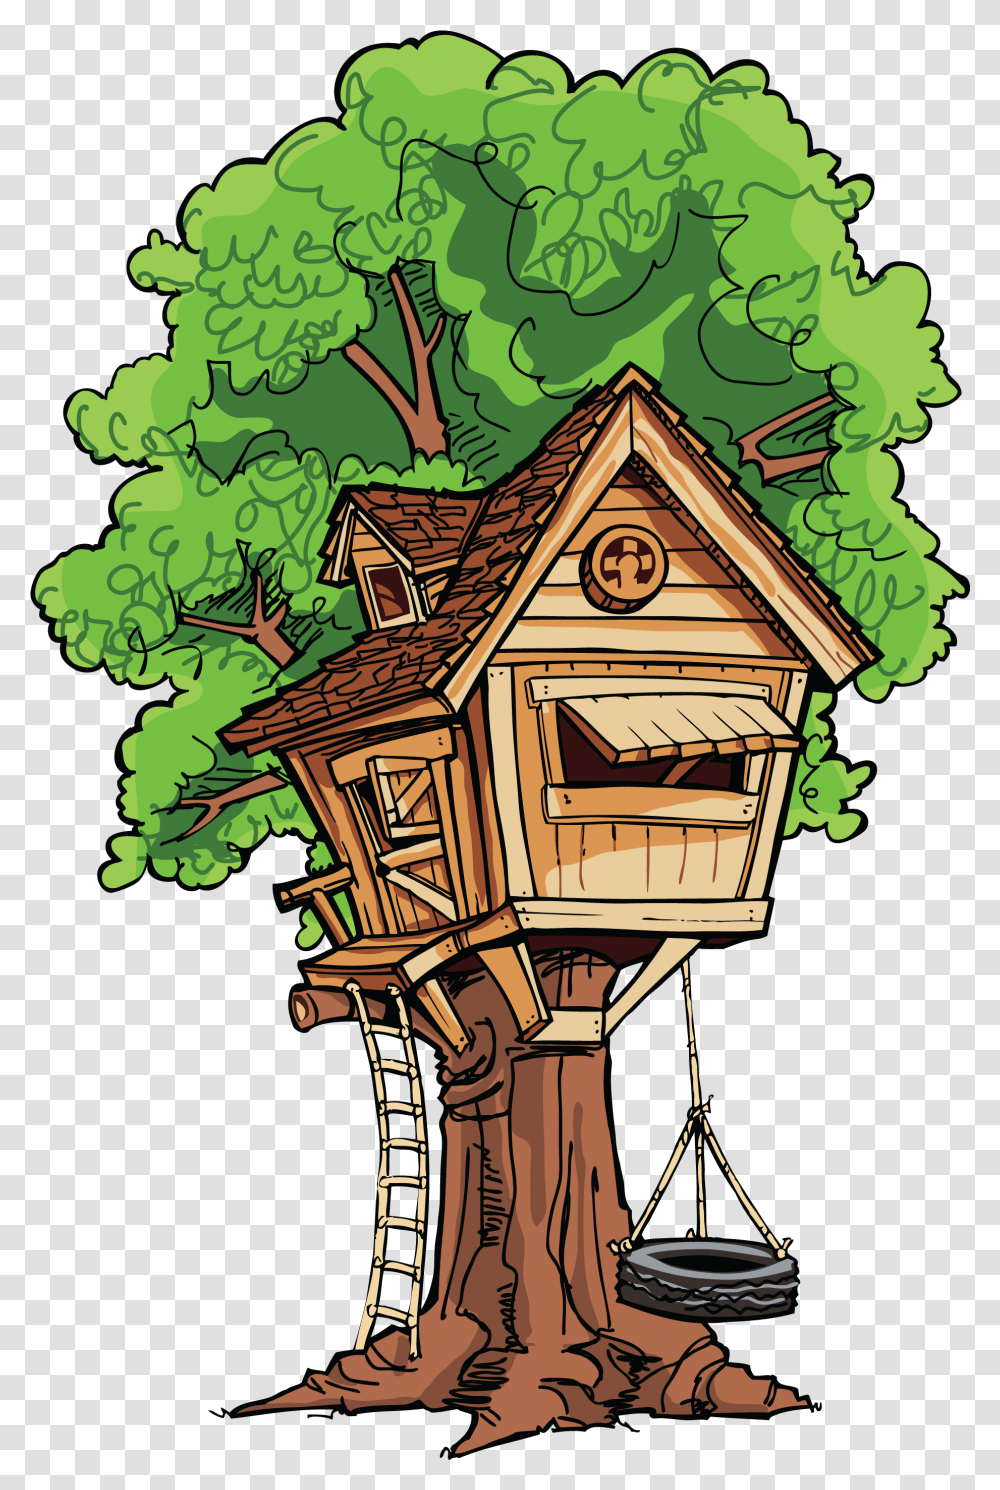 Tree House 1 Image Magic Tree House Treehouse, Housing, Building, Cabin, Clock Tower Transparent Png